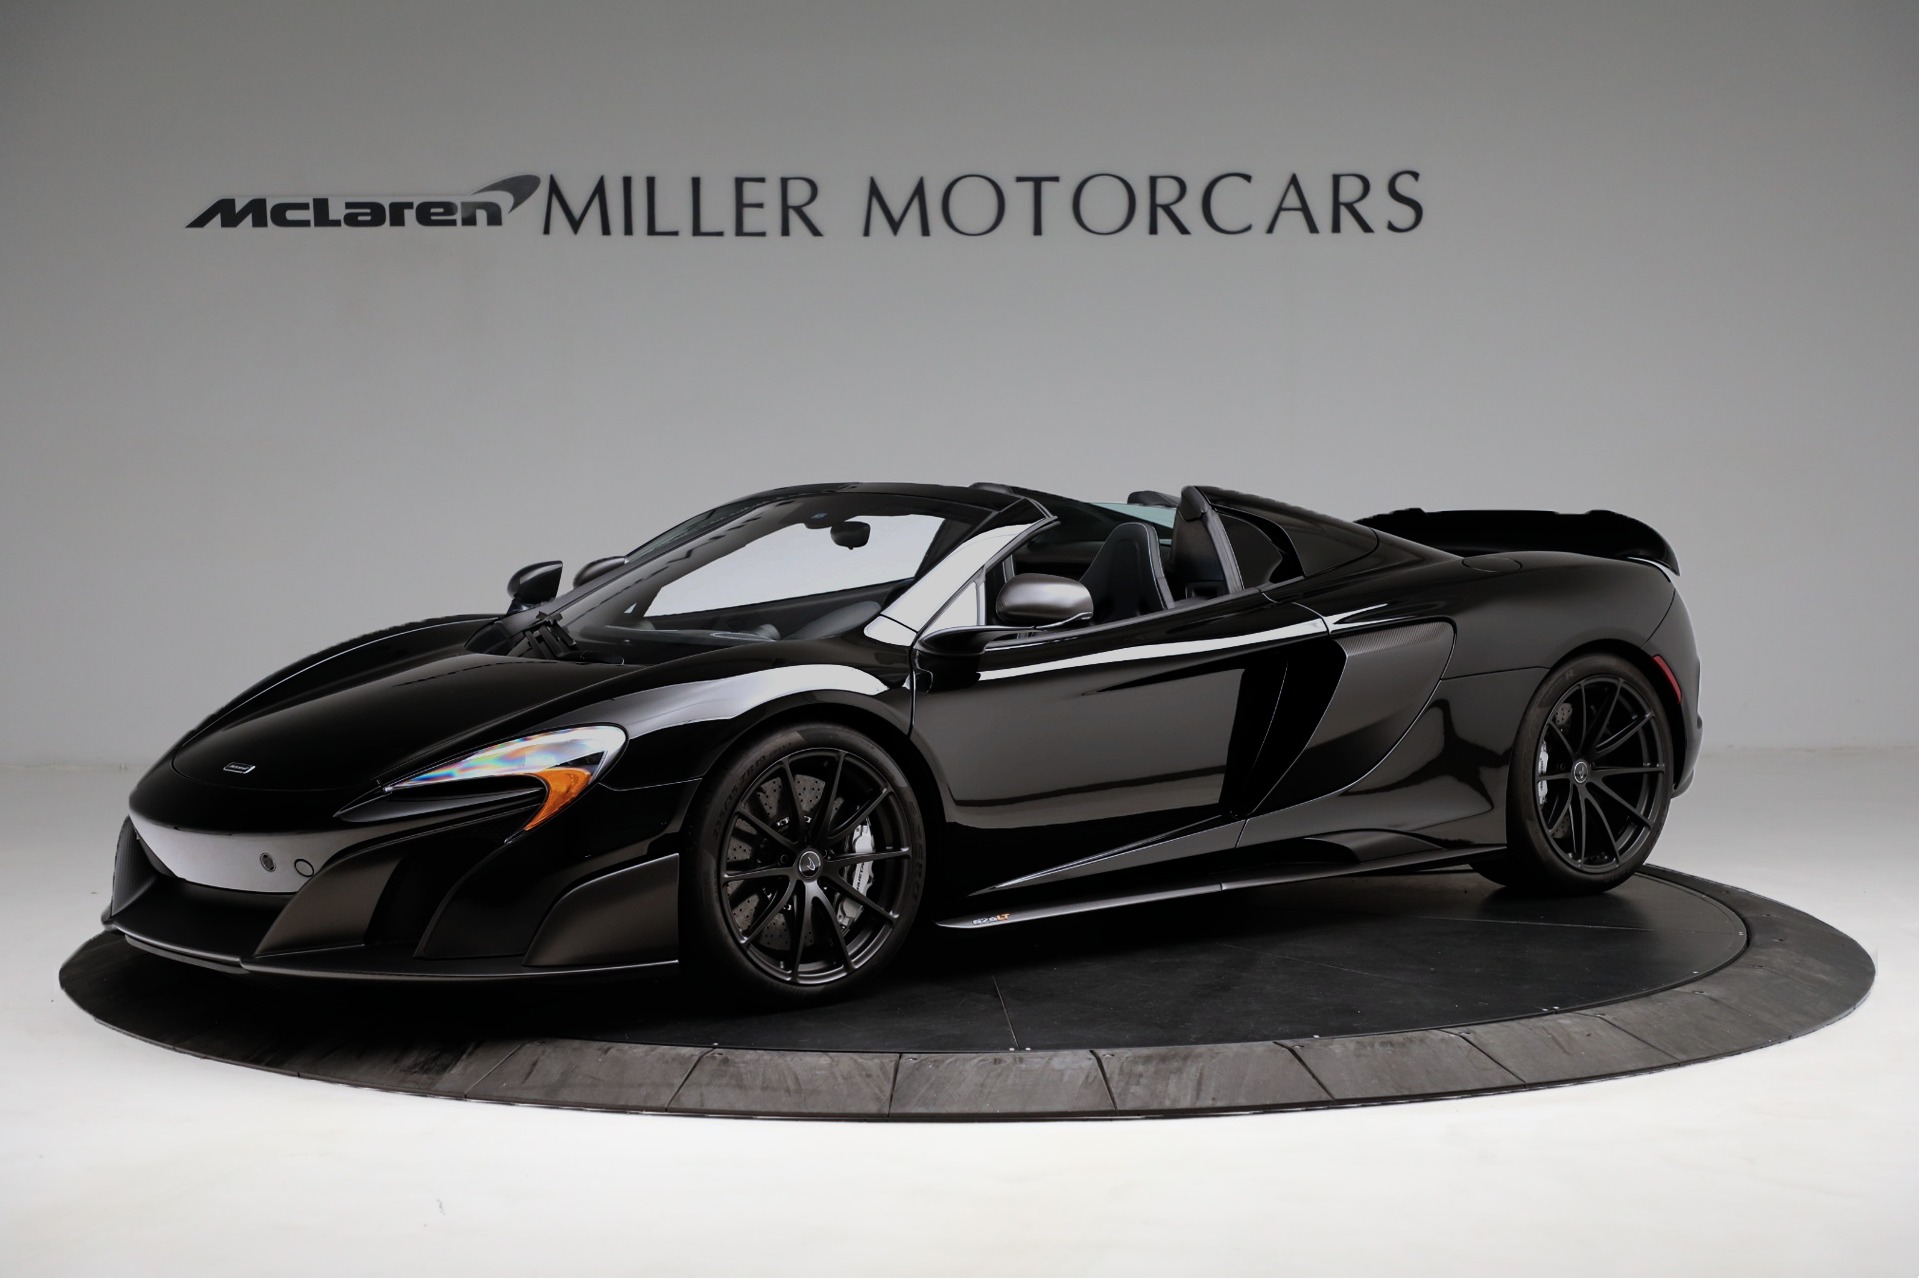 Used 2016 McLaren 675LT Spider for sale $319,900 at Rolls-Royce Motor Cars Greenwich in Greenwich CT 06830 1